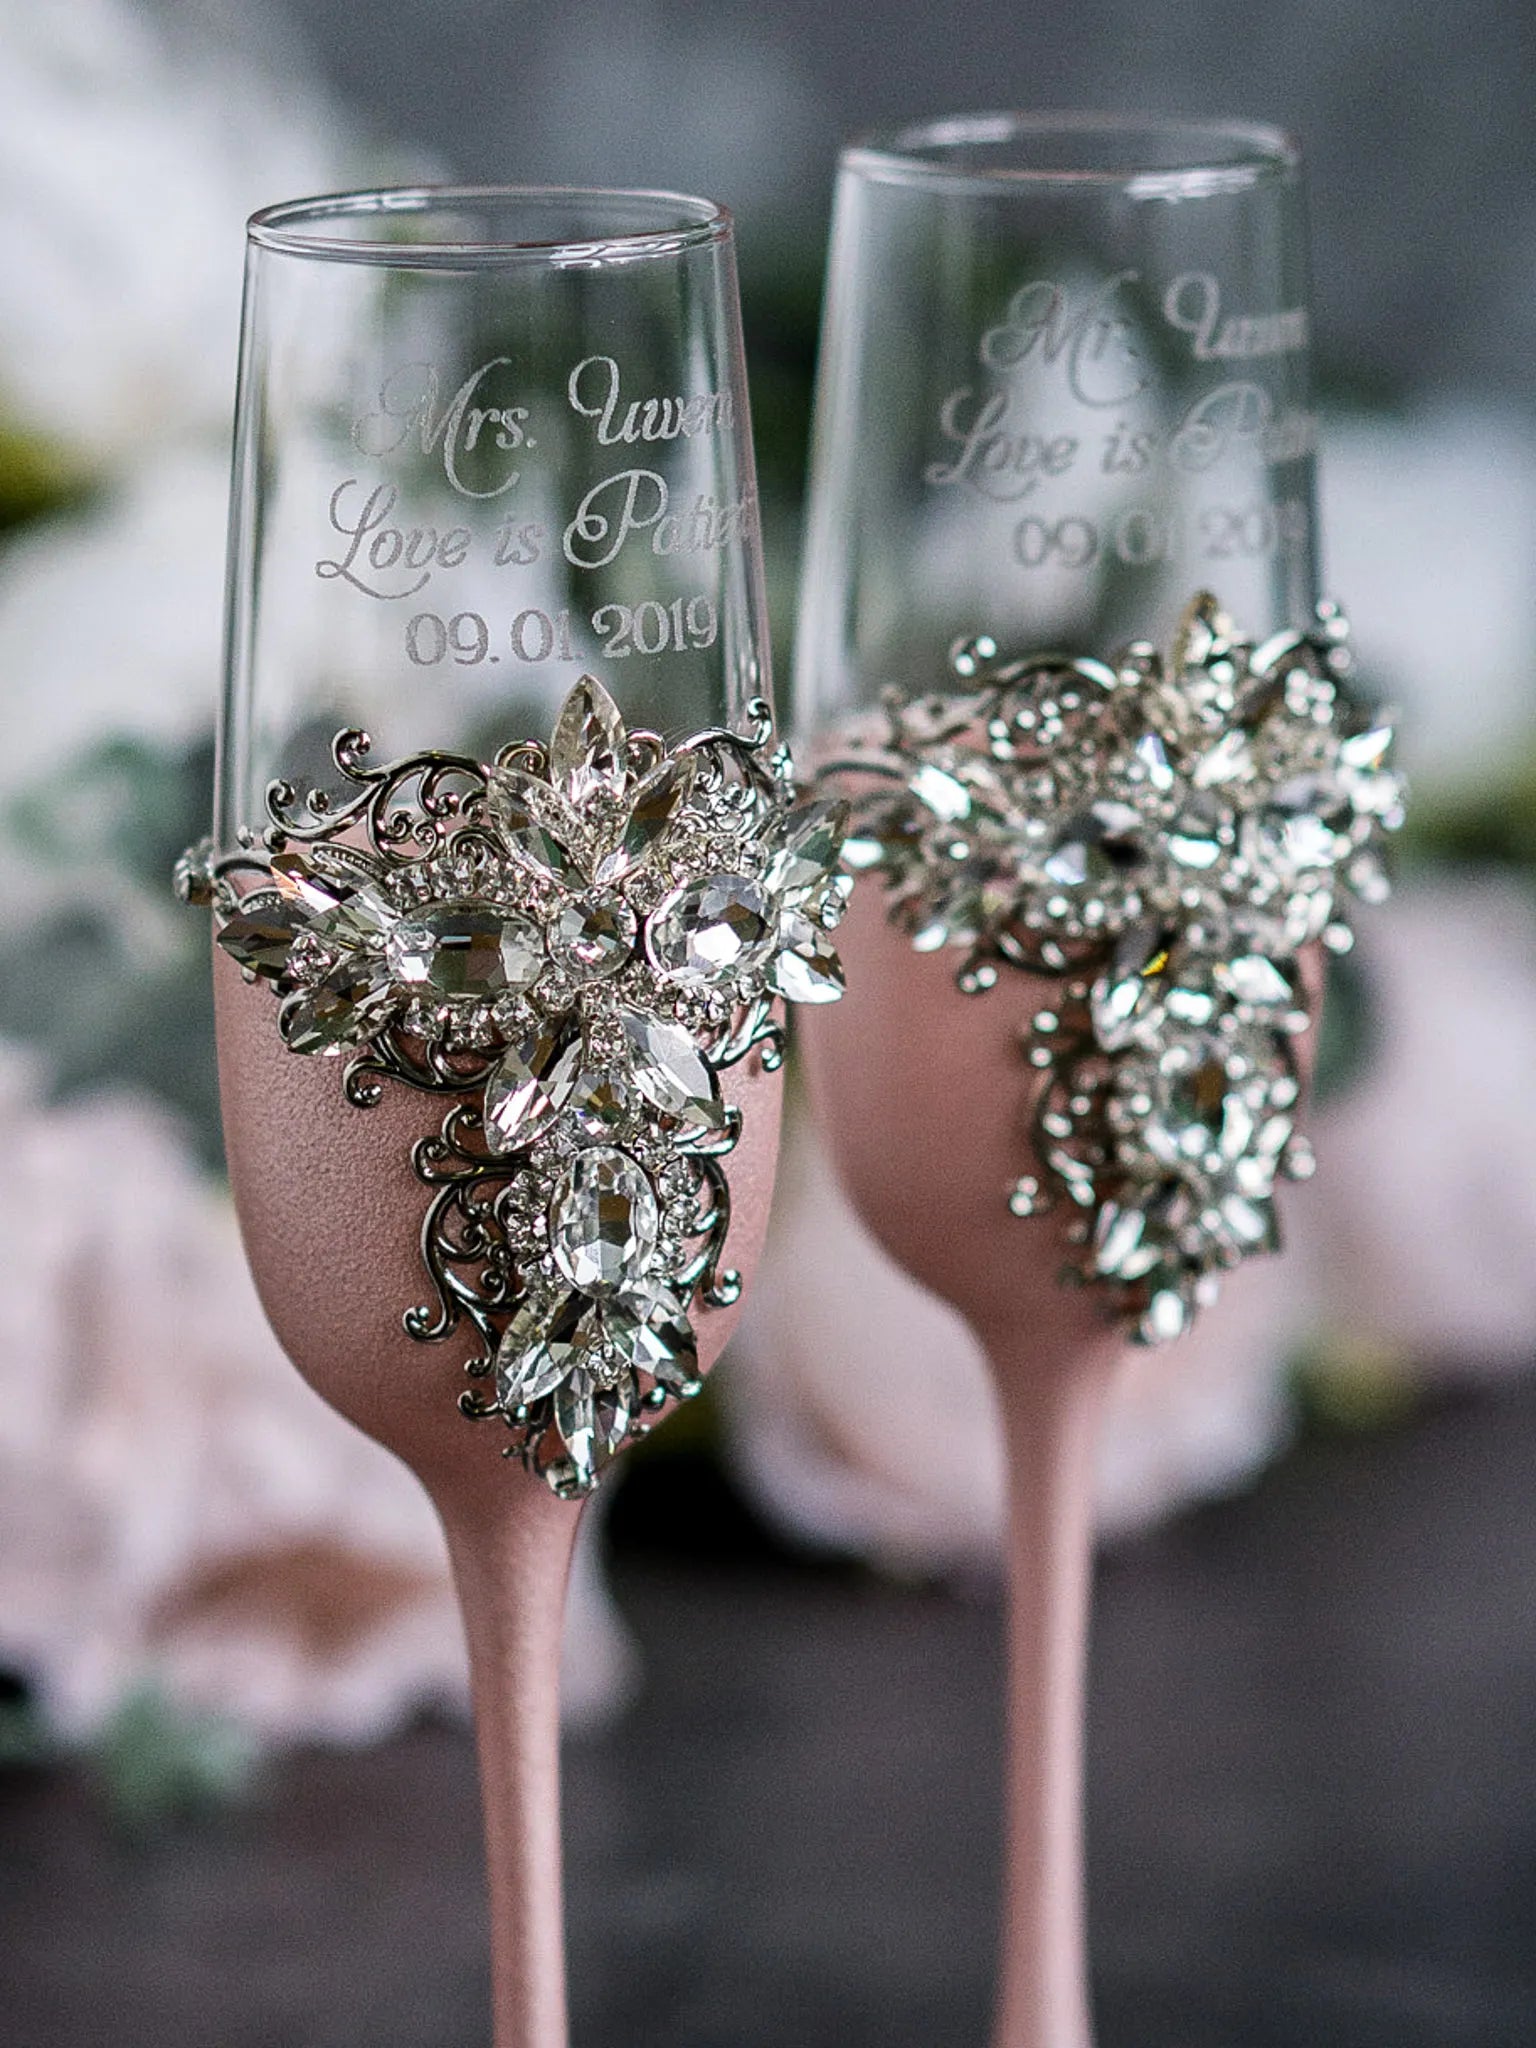 Personalized champagne glasses for wedding celebrations